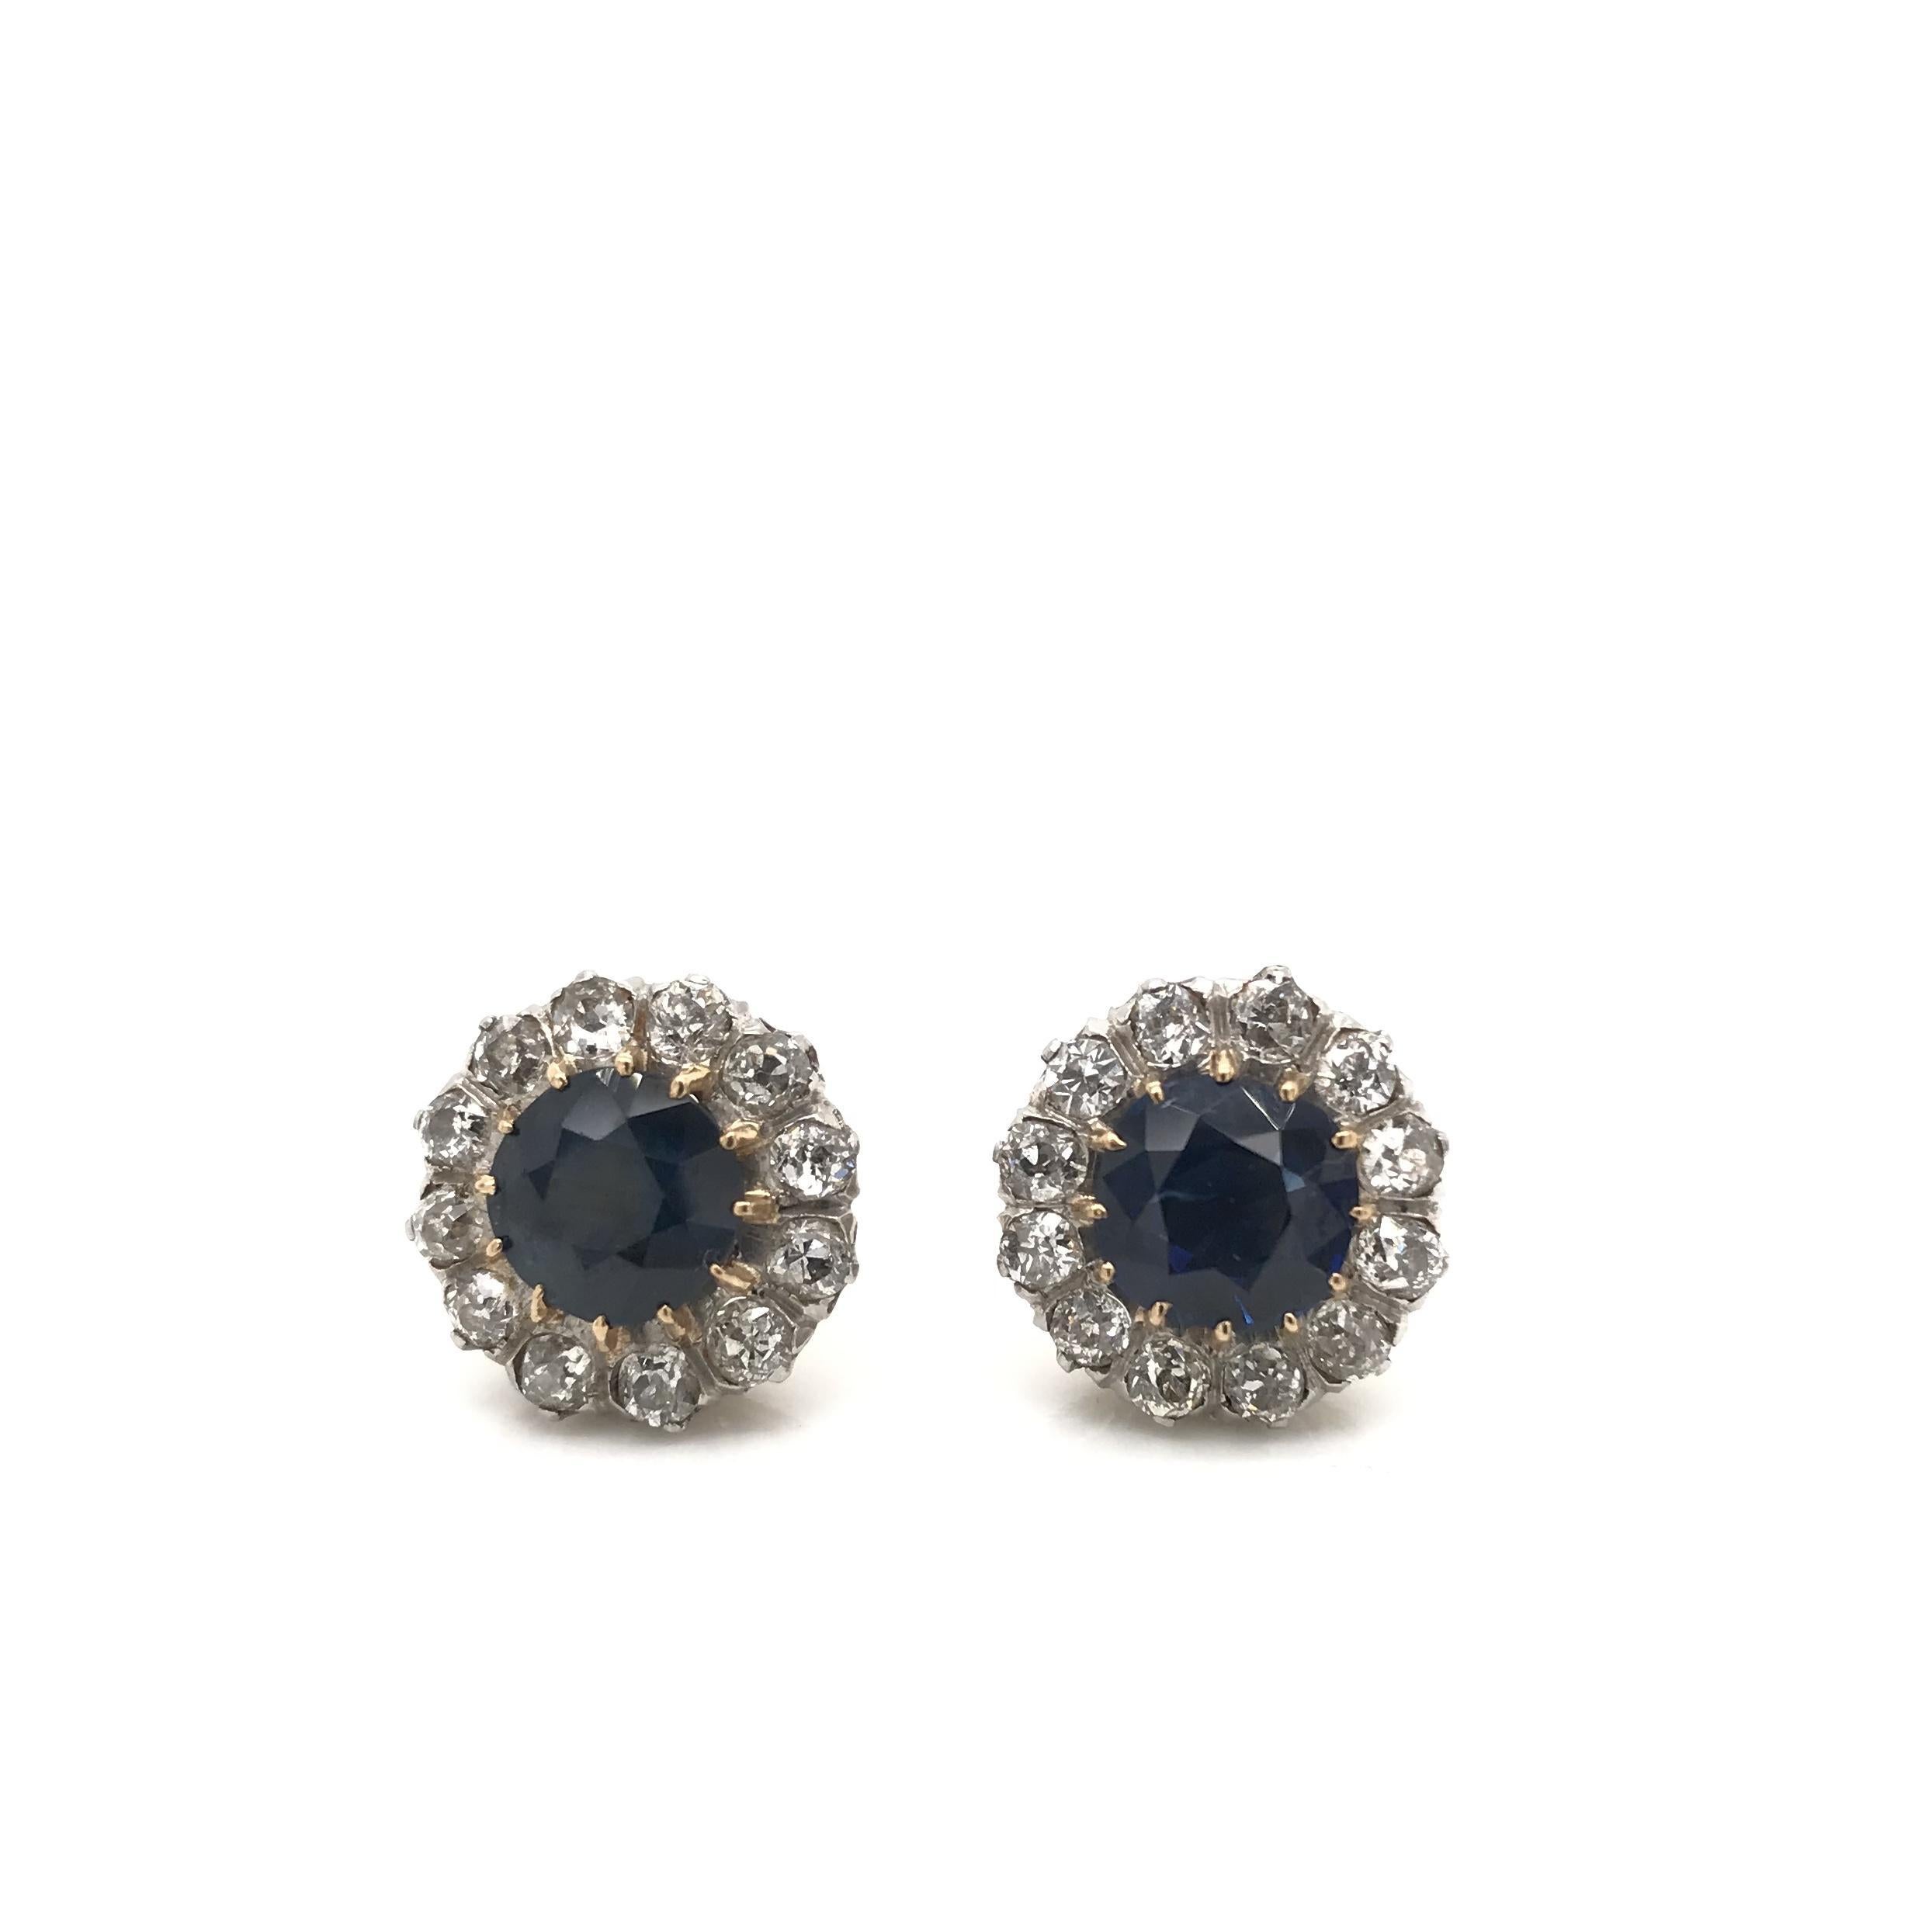 These dazzling antique earrings were crafted sometime during the Edwardian design period (1900-1920). Each earring features a stunning cushion cut blue sapphire. The sapphires have been certified by the Gemological Institute of America (GIA) and